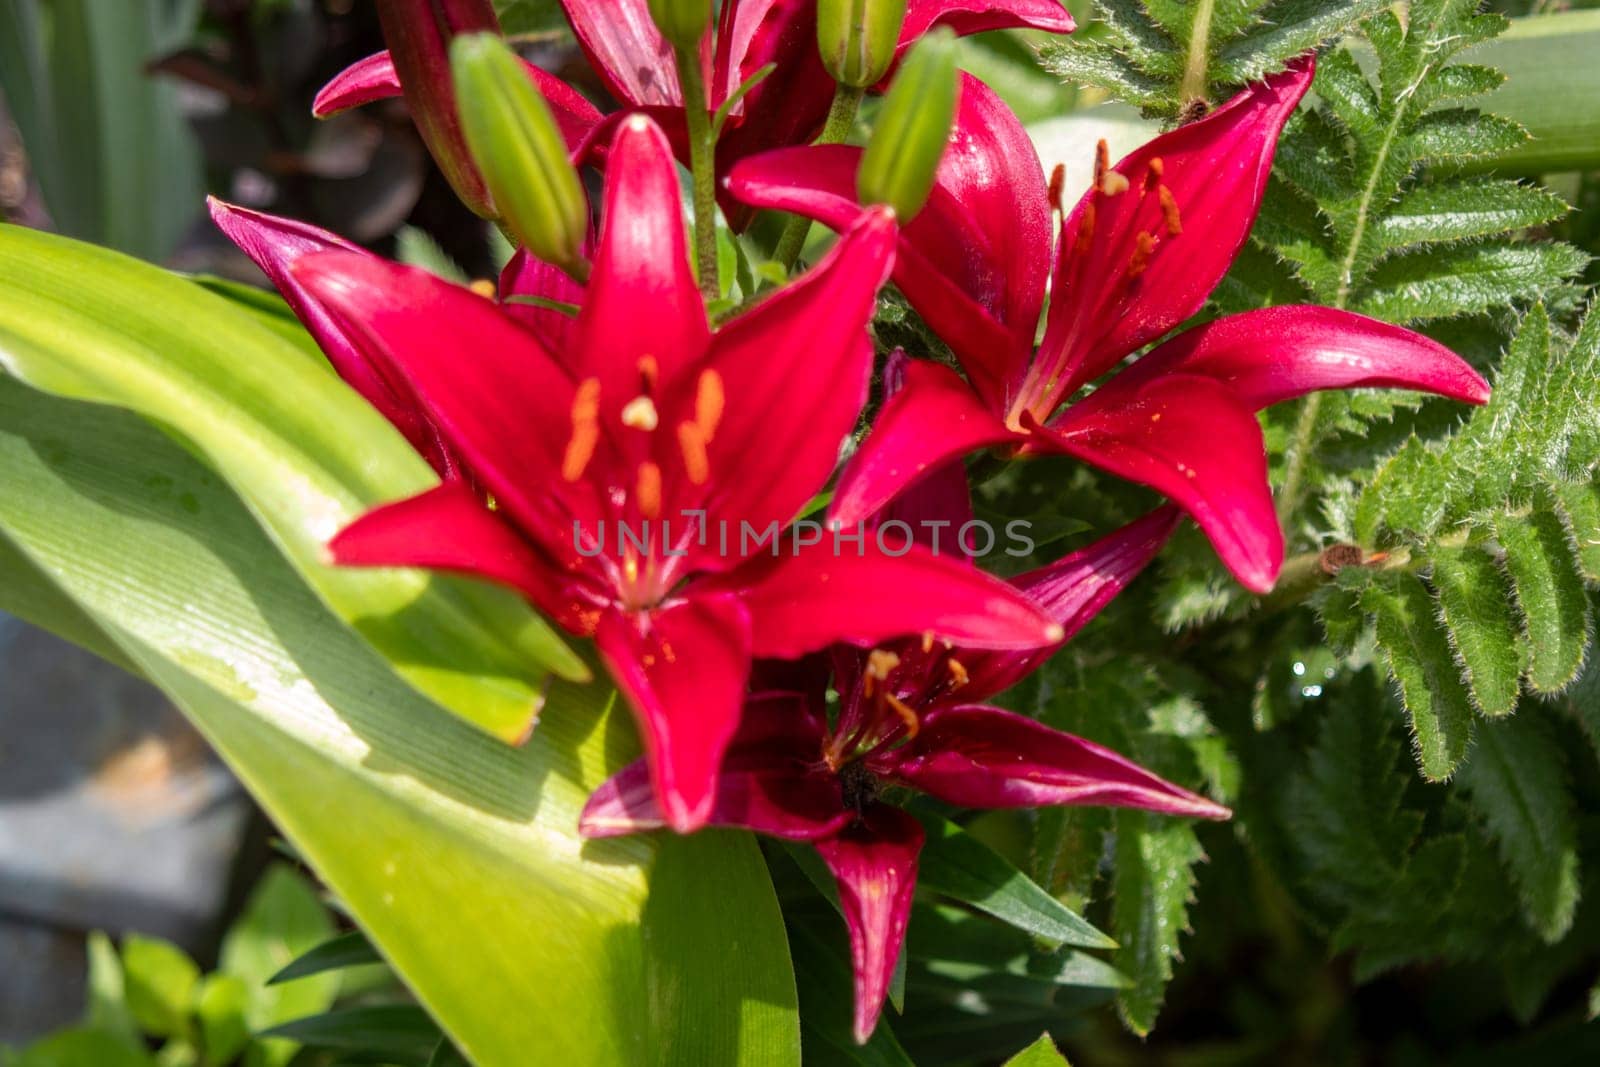 Top Side View of a Brunch of dark red Lilys in the Botanica Gardens Wichita Kansas. High quality photo